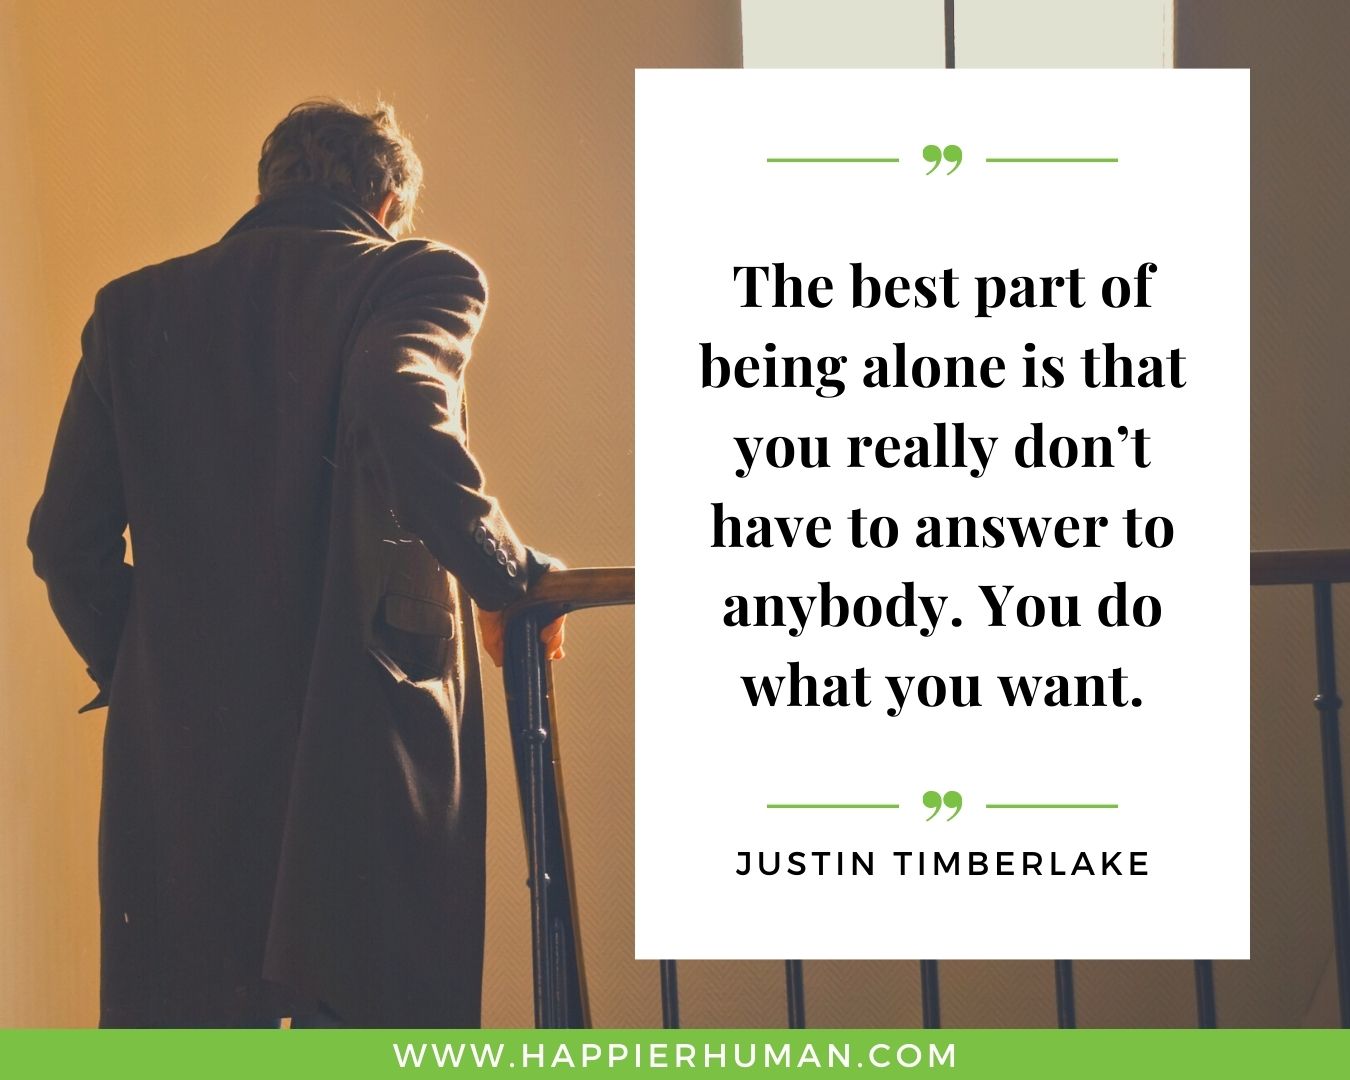 Loneliness Quotes - “The best part of being alone is that you really don’t have to answer to anybody. You do what you want.” – Justin Timberlake